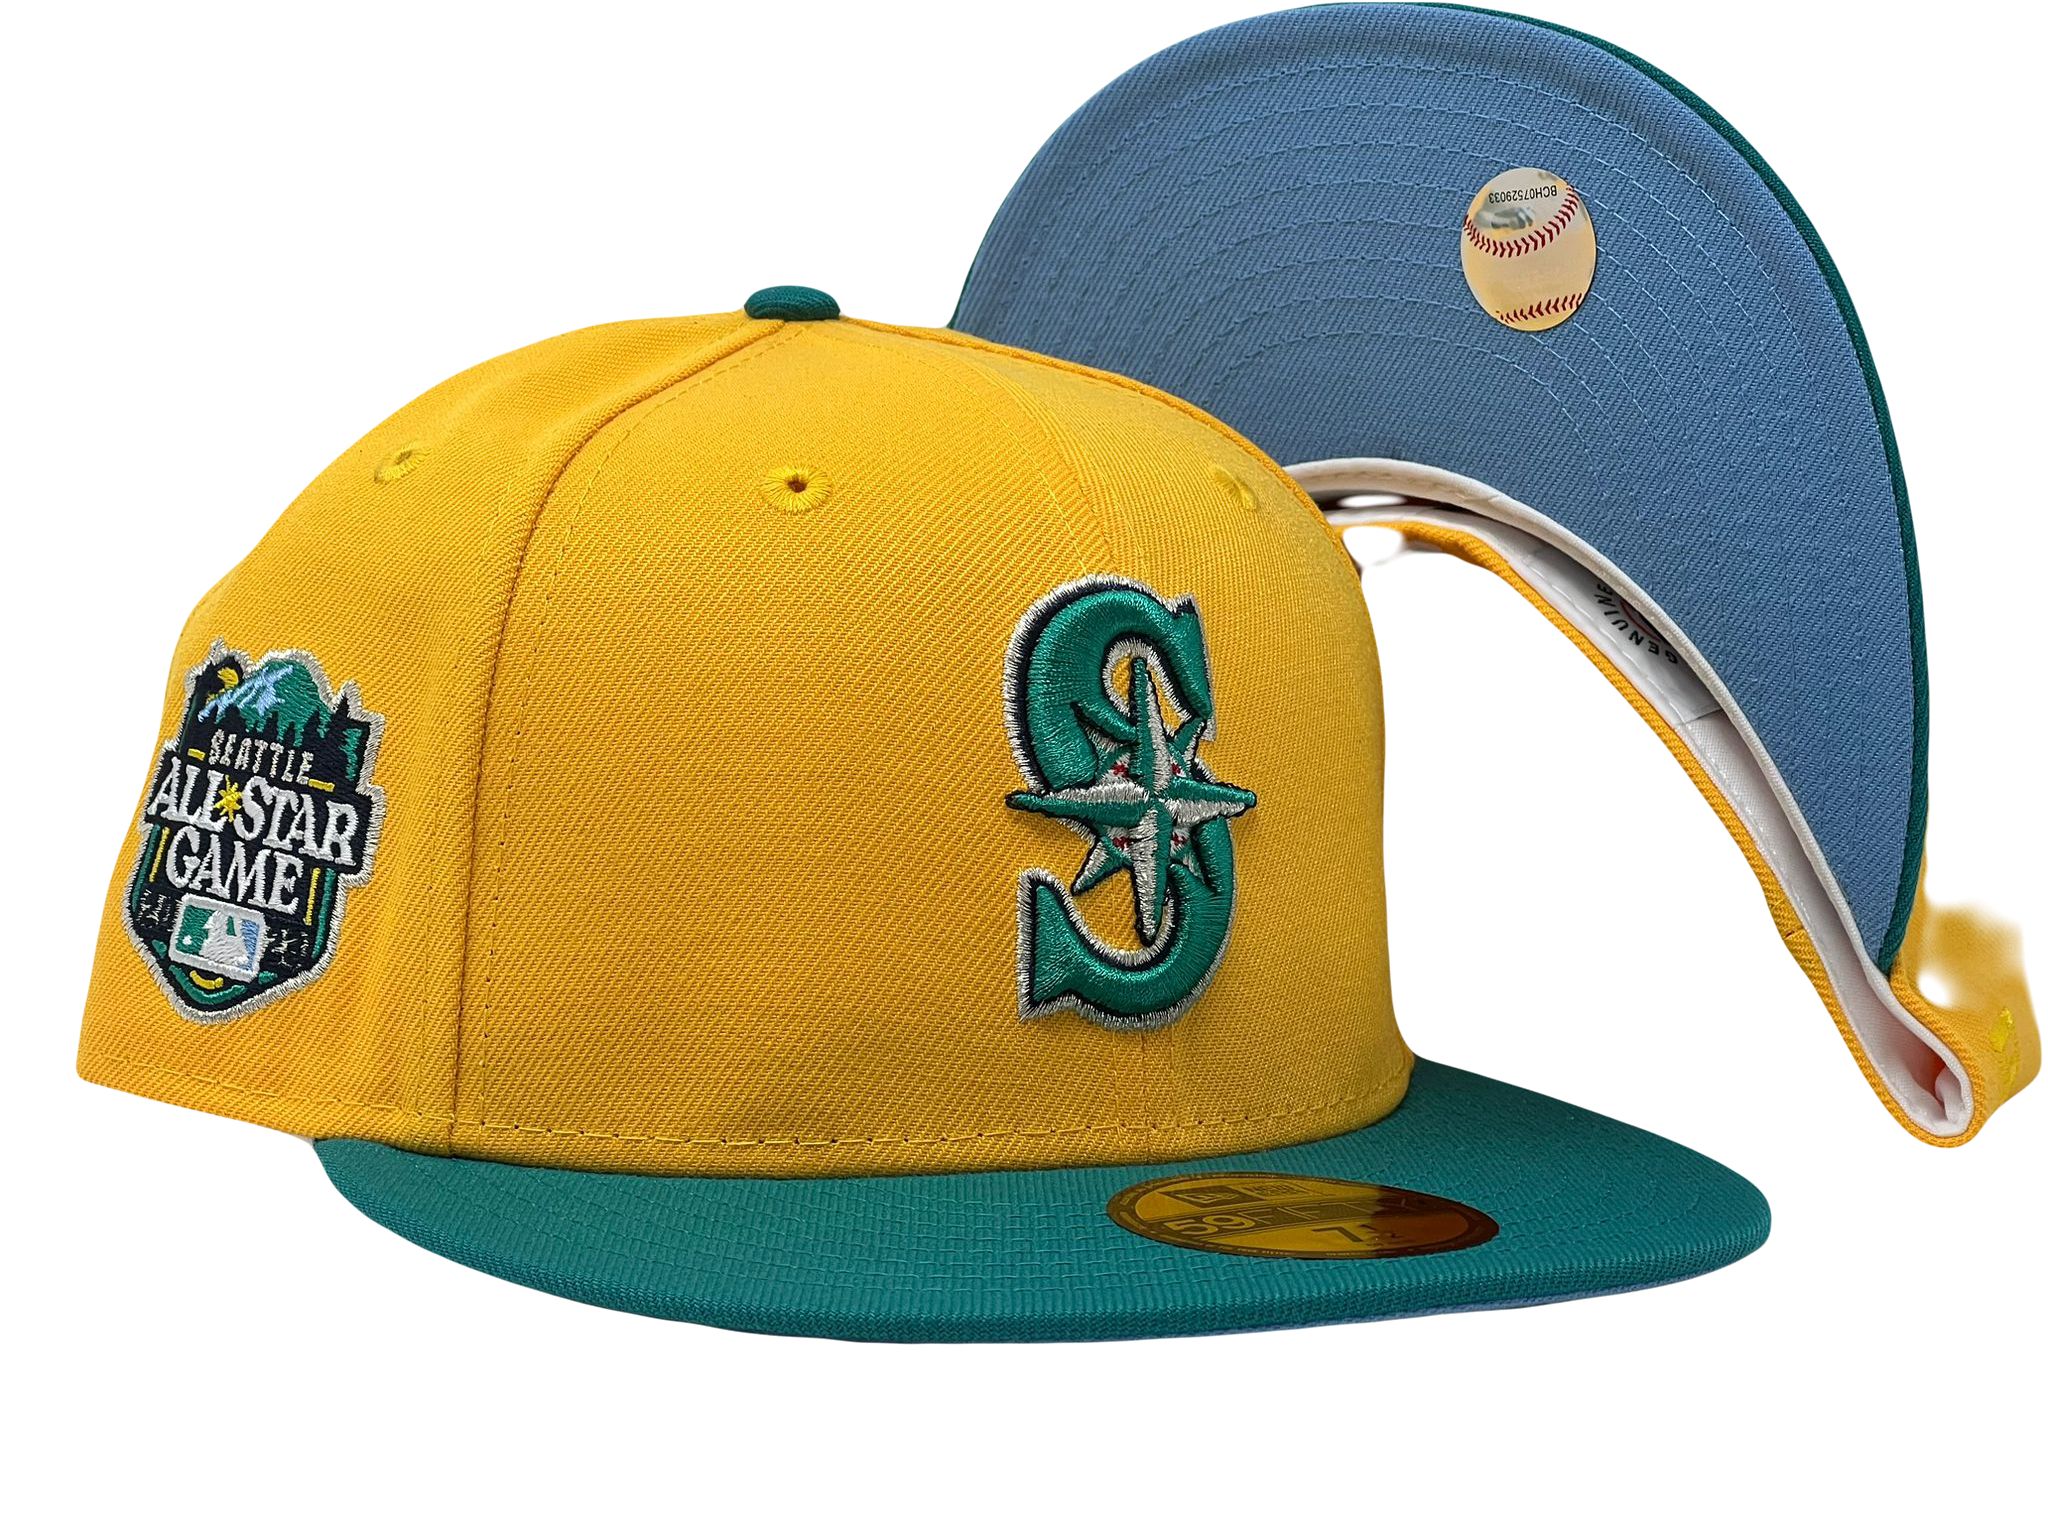 Seattle Mariners Colors in 2023  Seattle mariners, Team colors